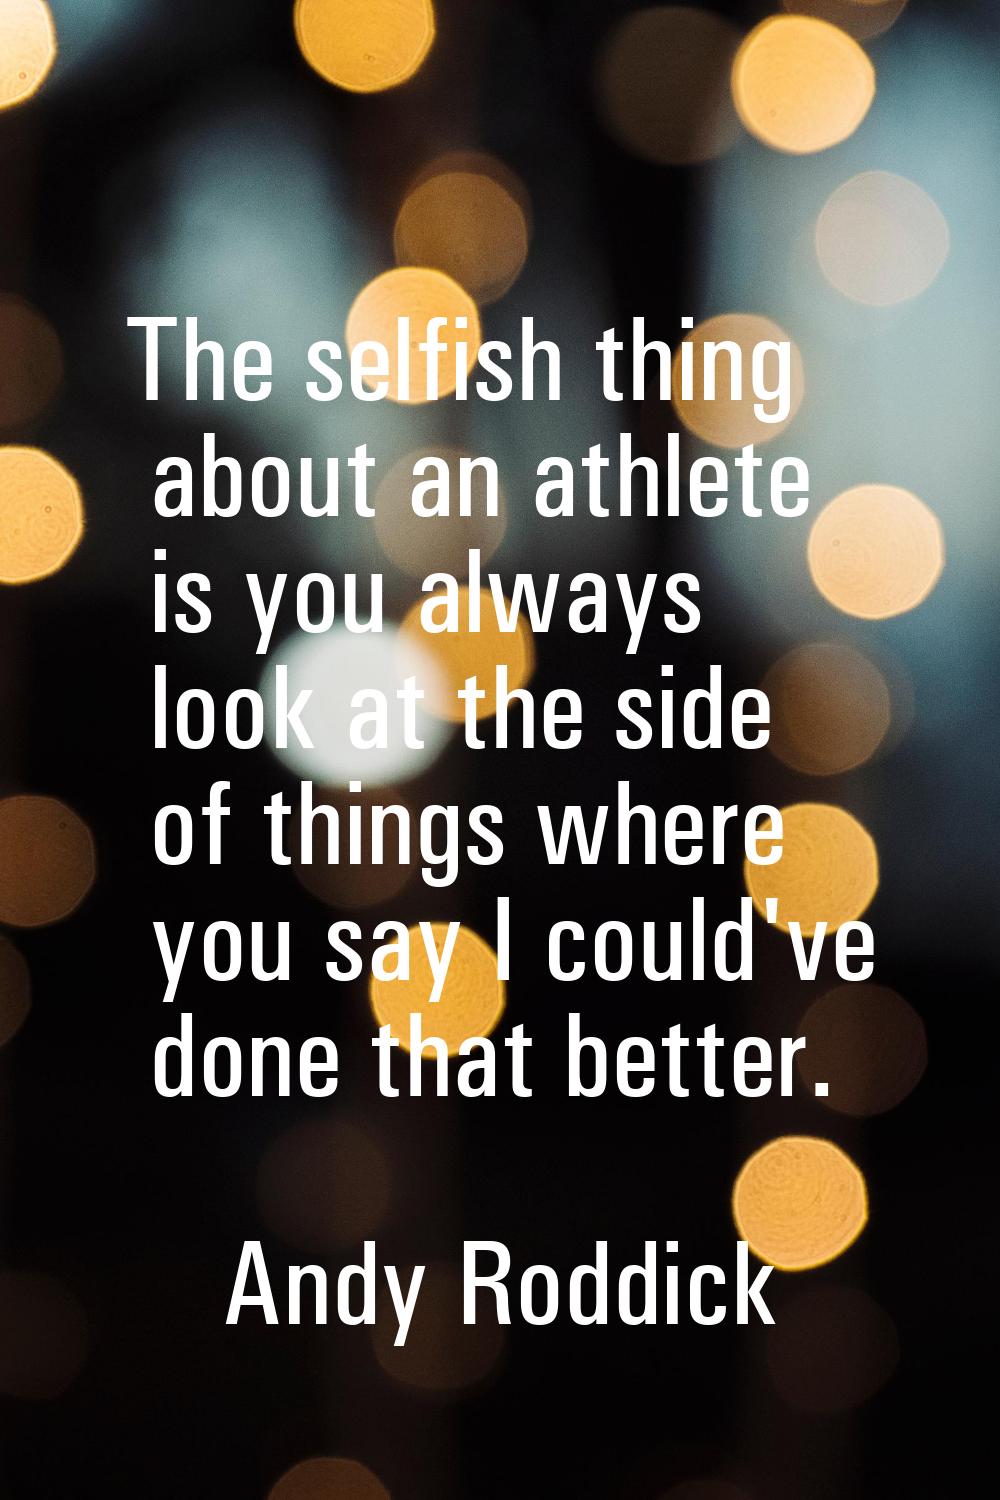 The selfish thing about an athlete is you always look at the side of things where you say I could'v